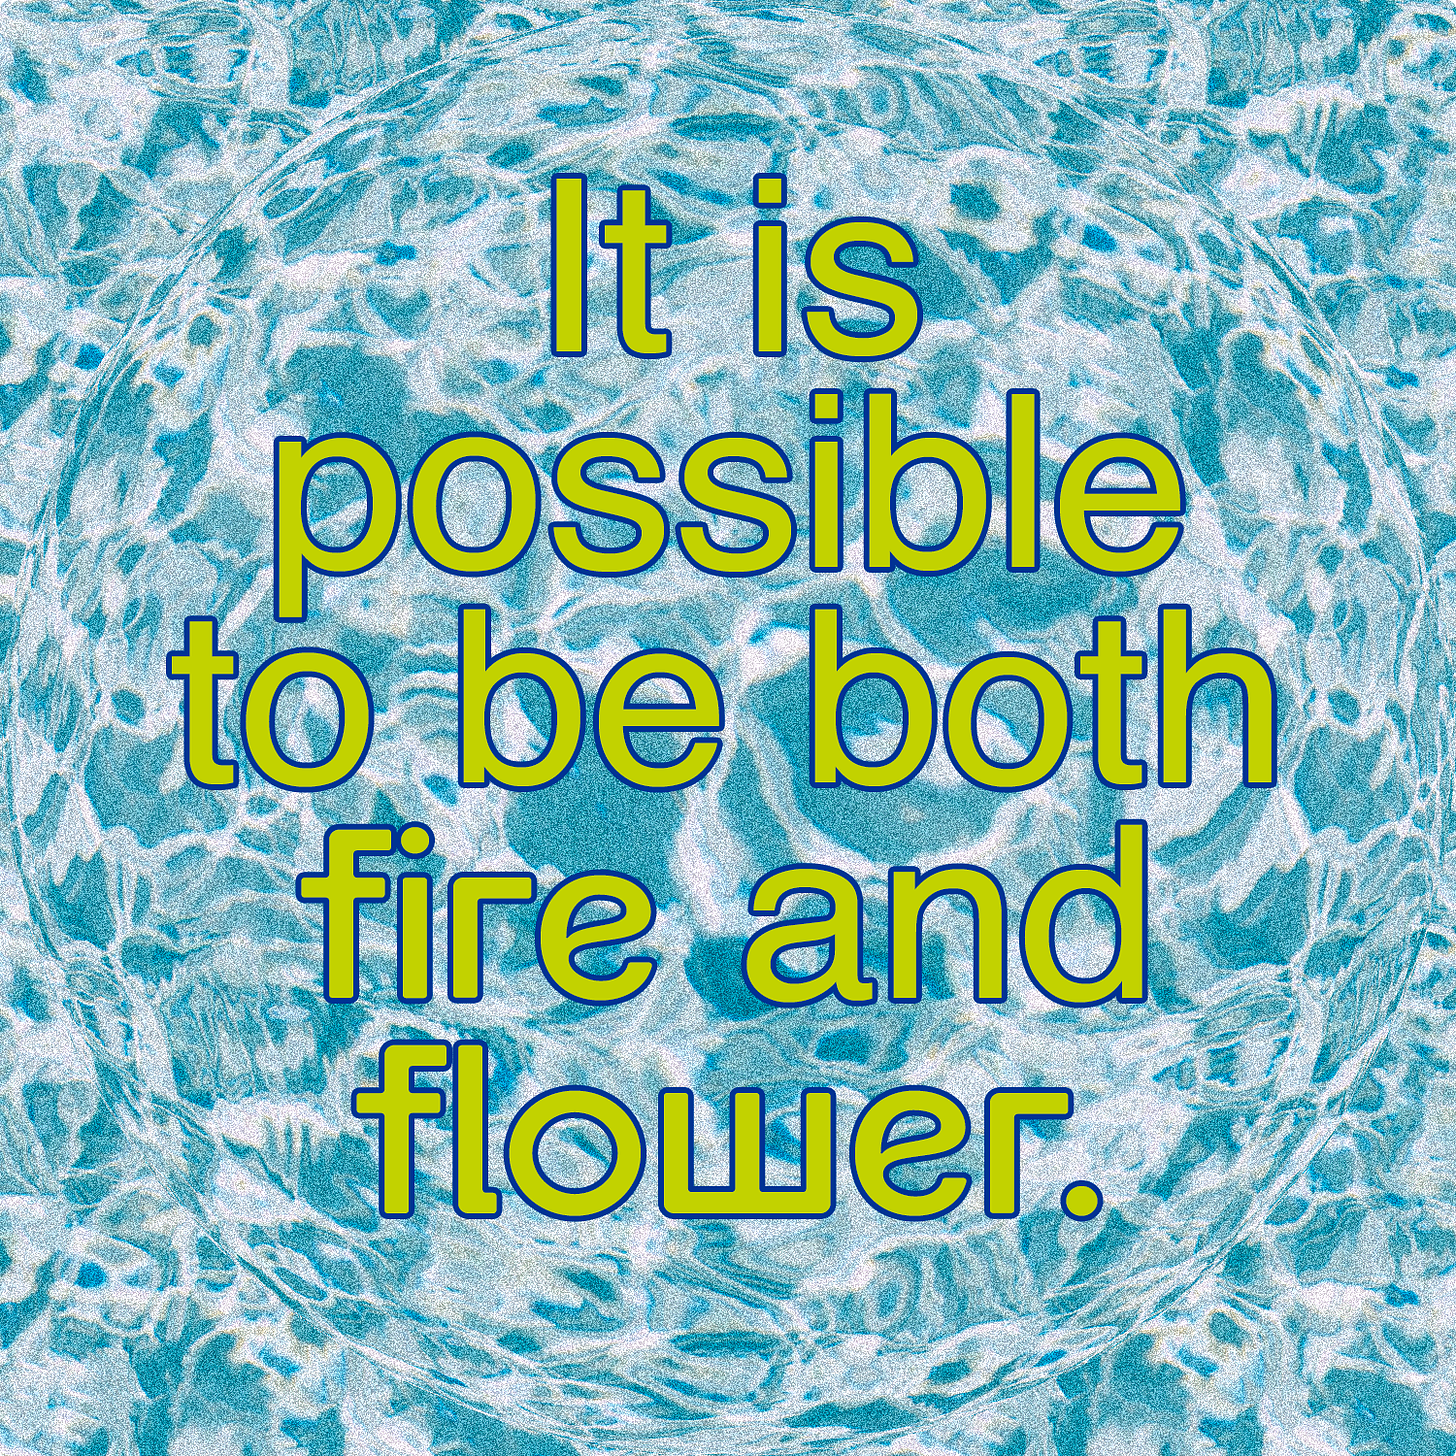 Graphic design that has a water like background. Yellow green letters center align that read, "It is possible to be both fire and flower."